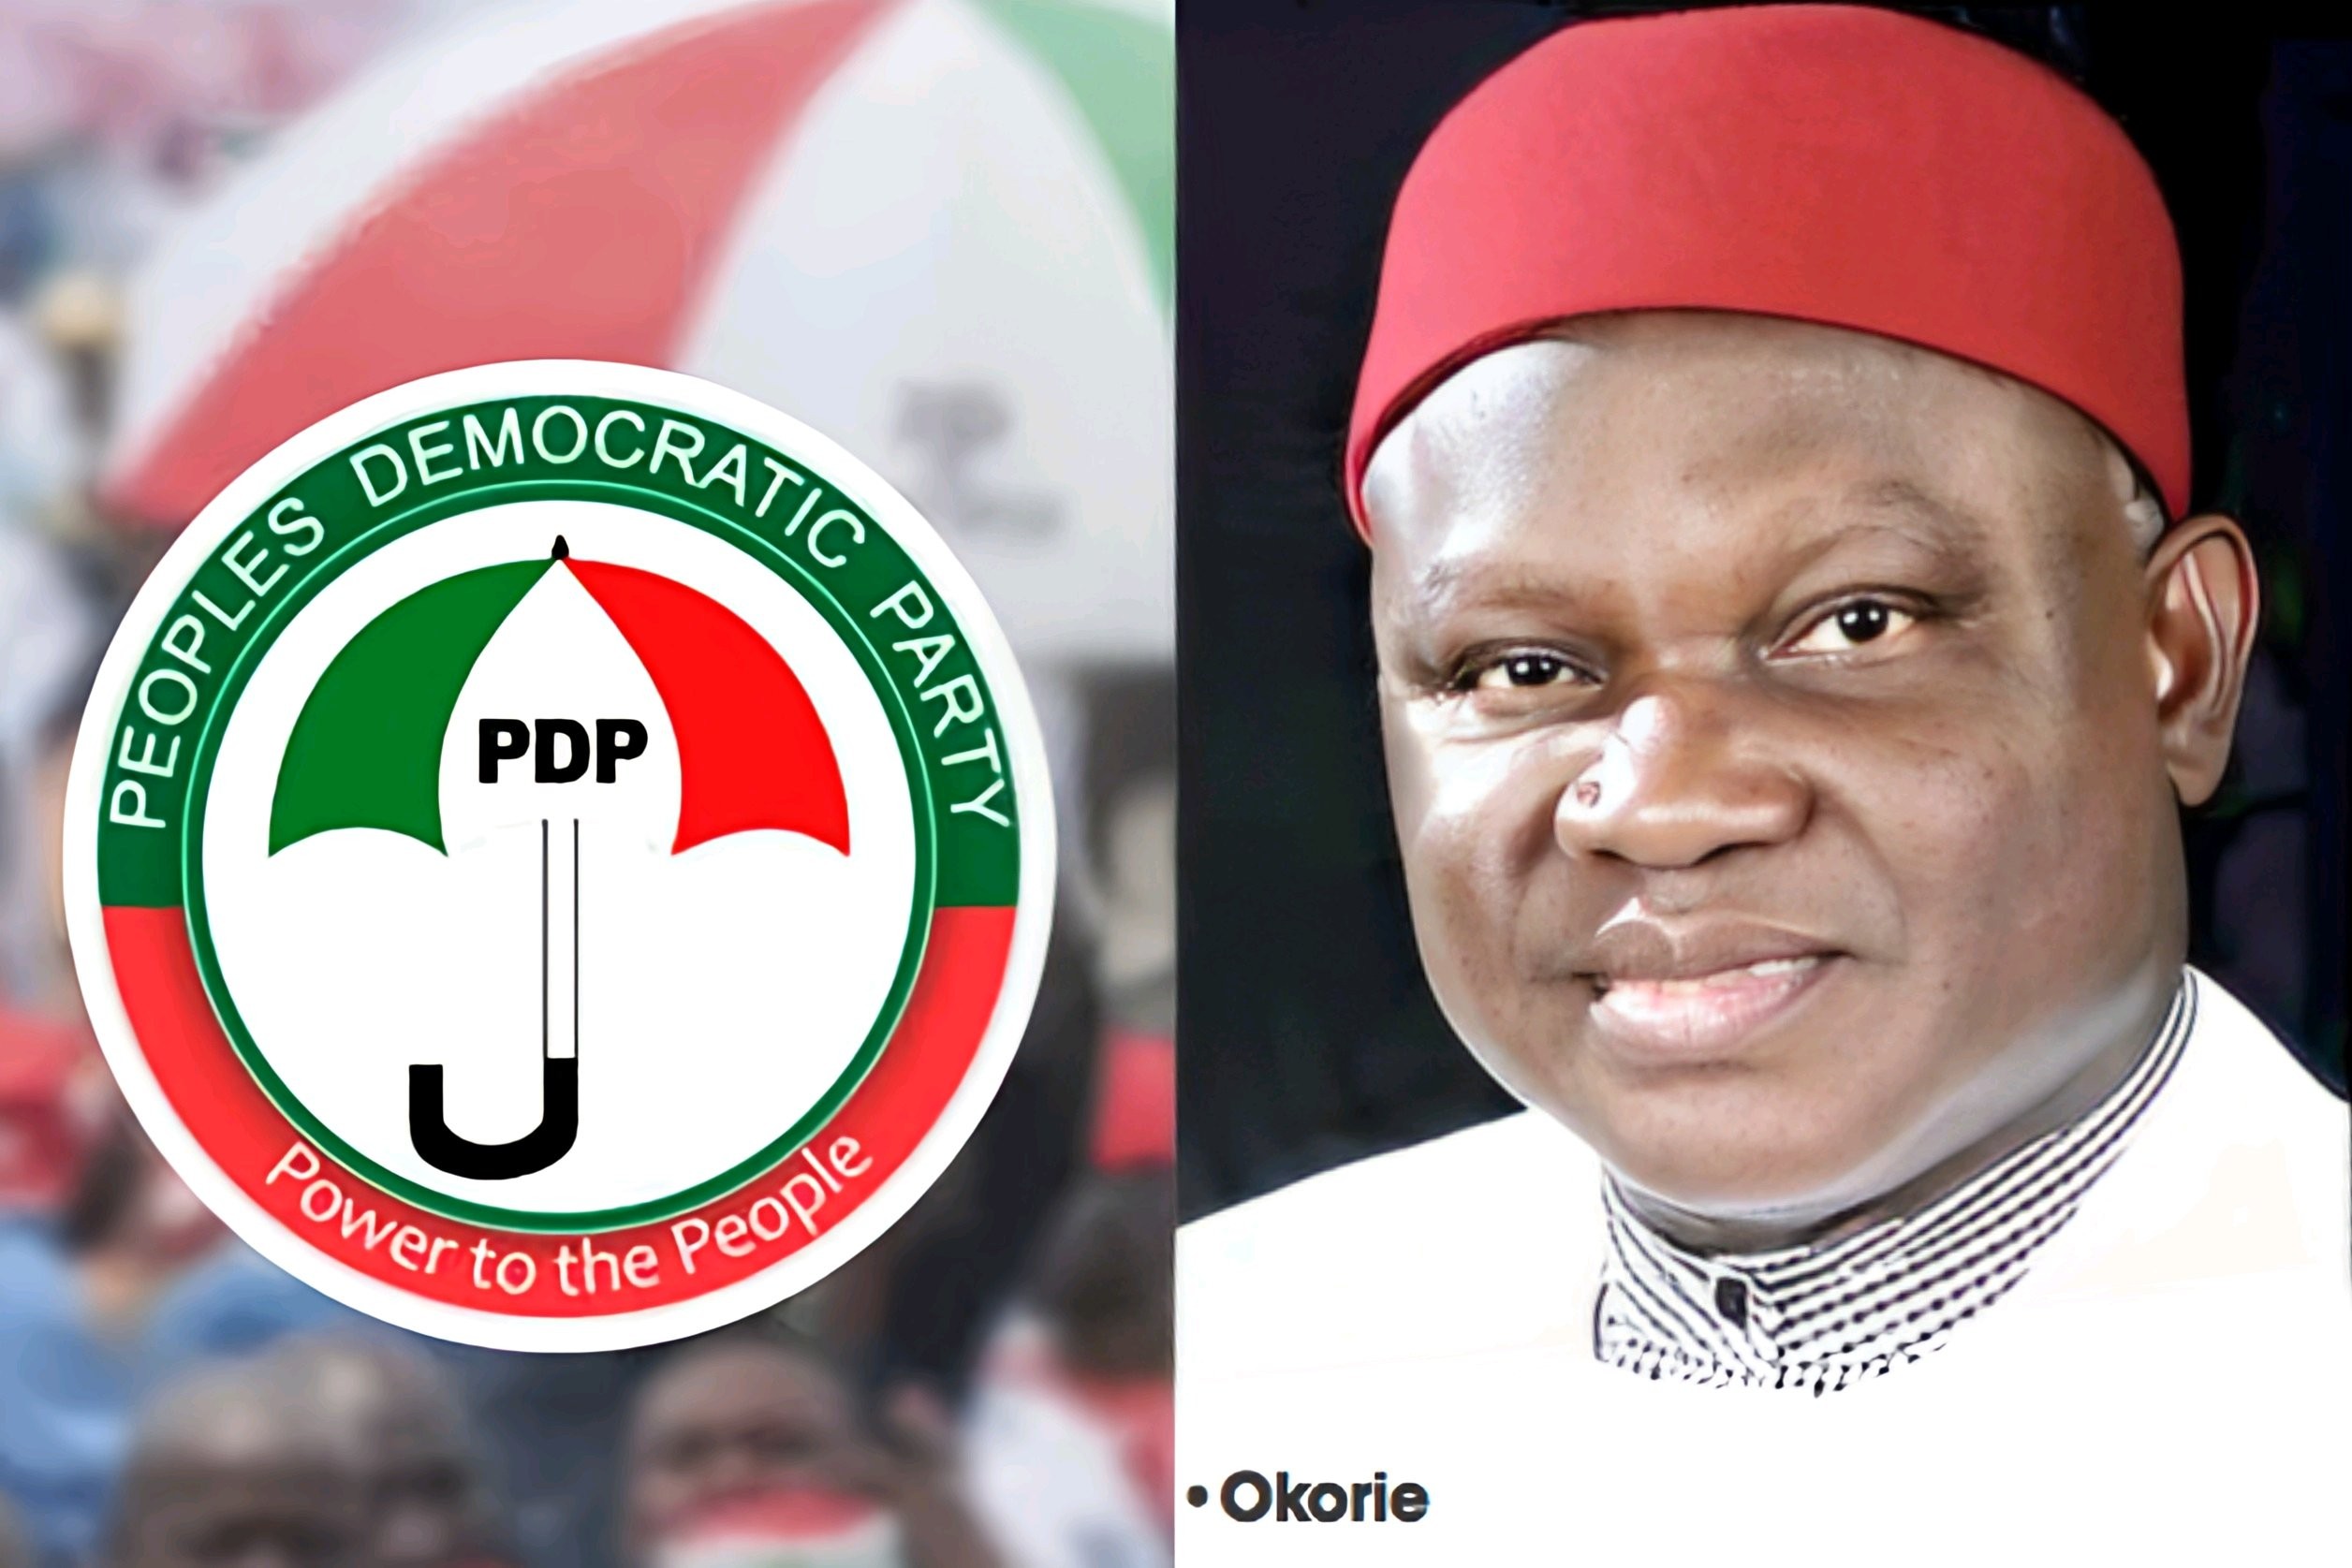 When The PDP Was In Power, Late Ogbulafor Boasted The Party Would Rule Nigeria For 60 Years- According to Okorie